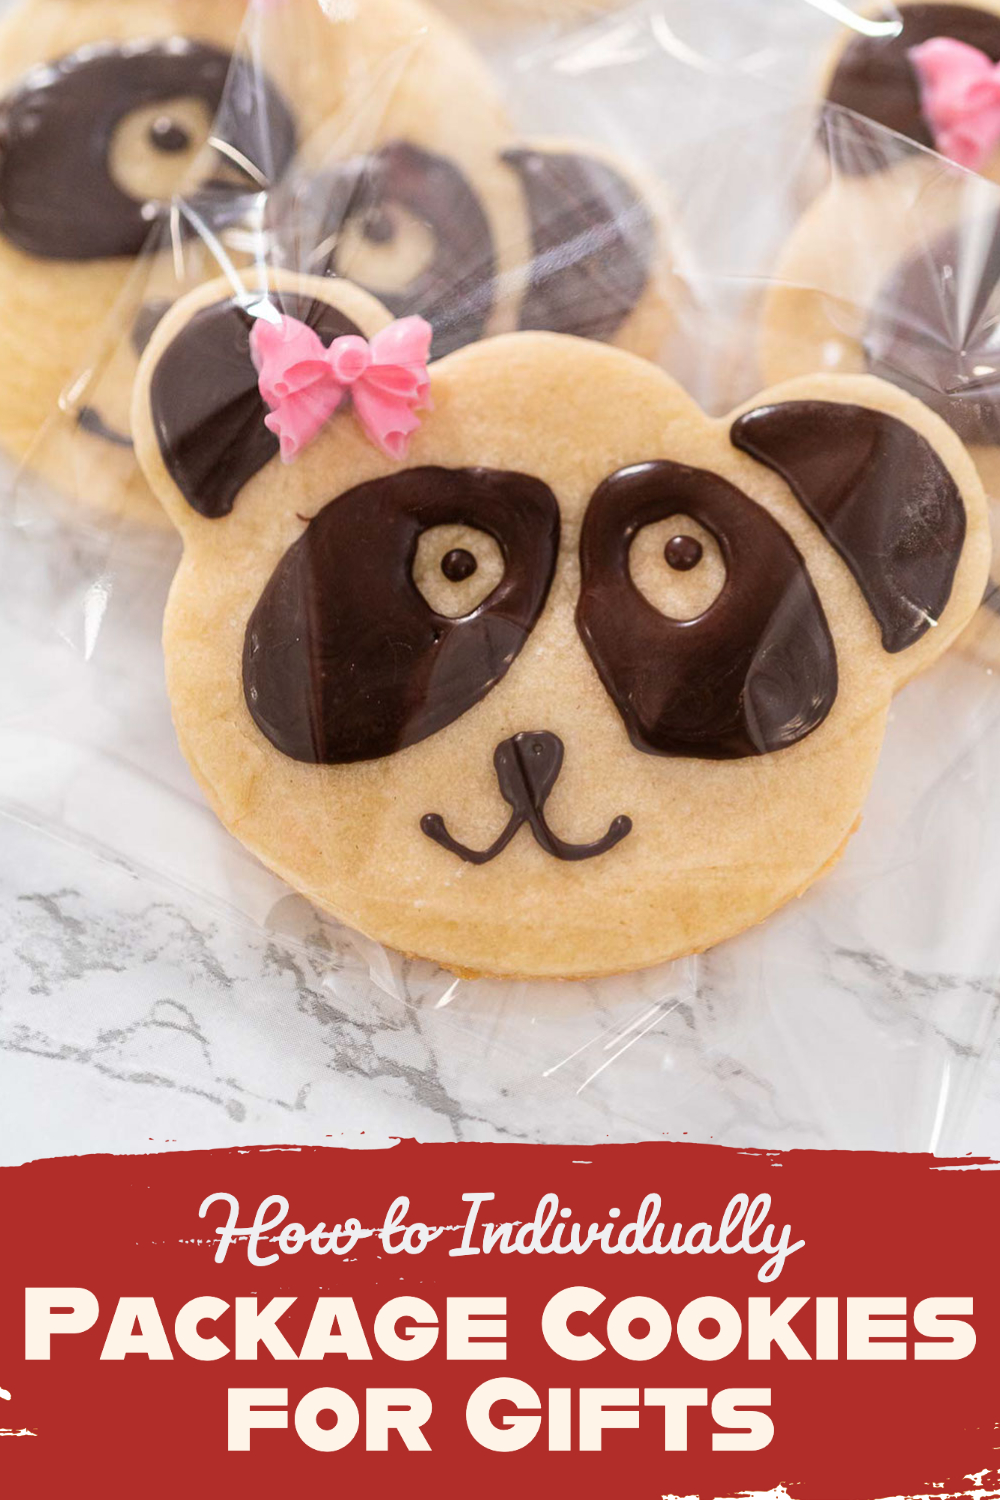 How to Individually Package Cookies for Gifts